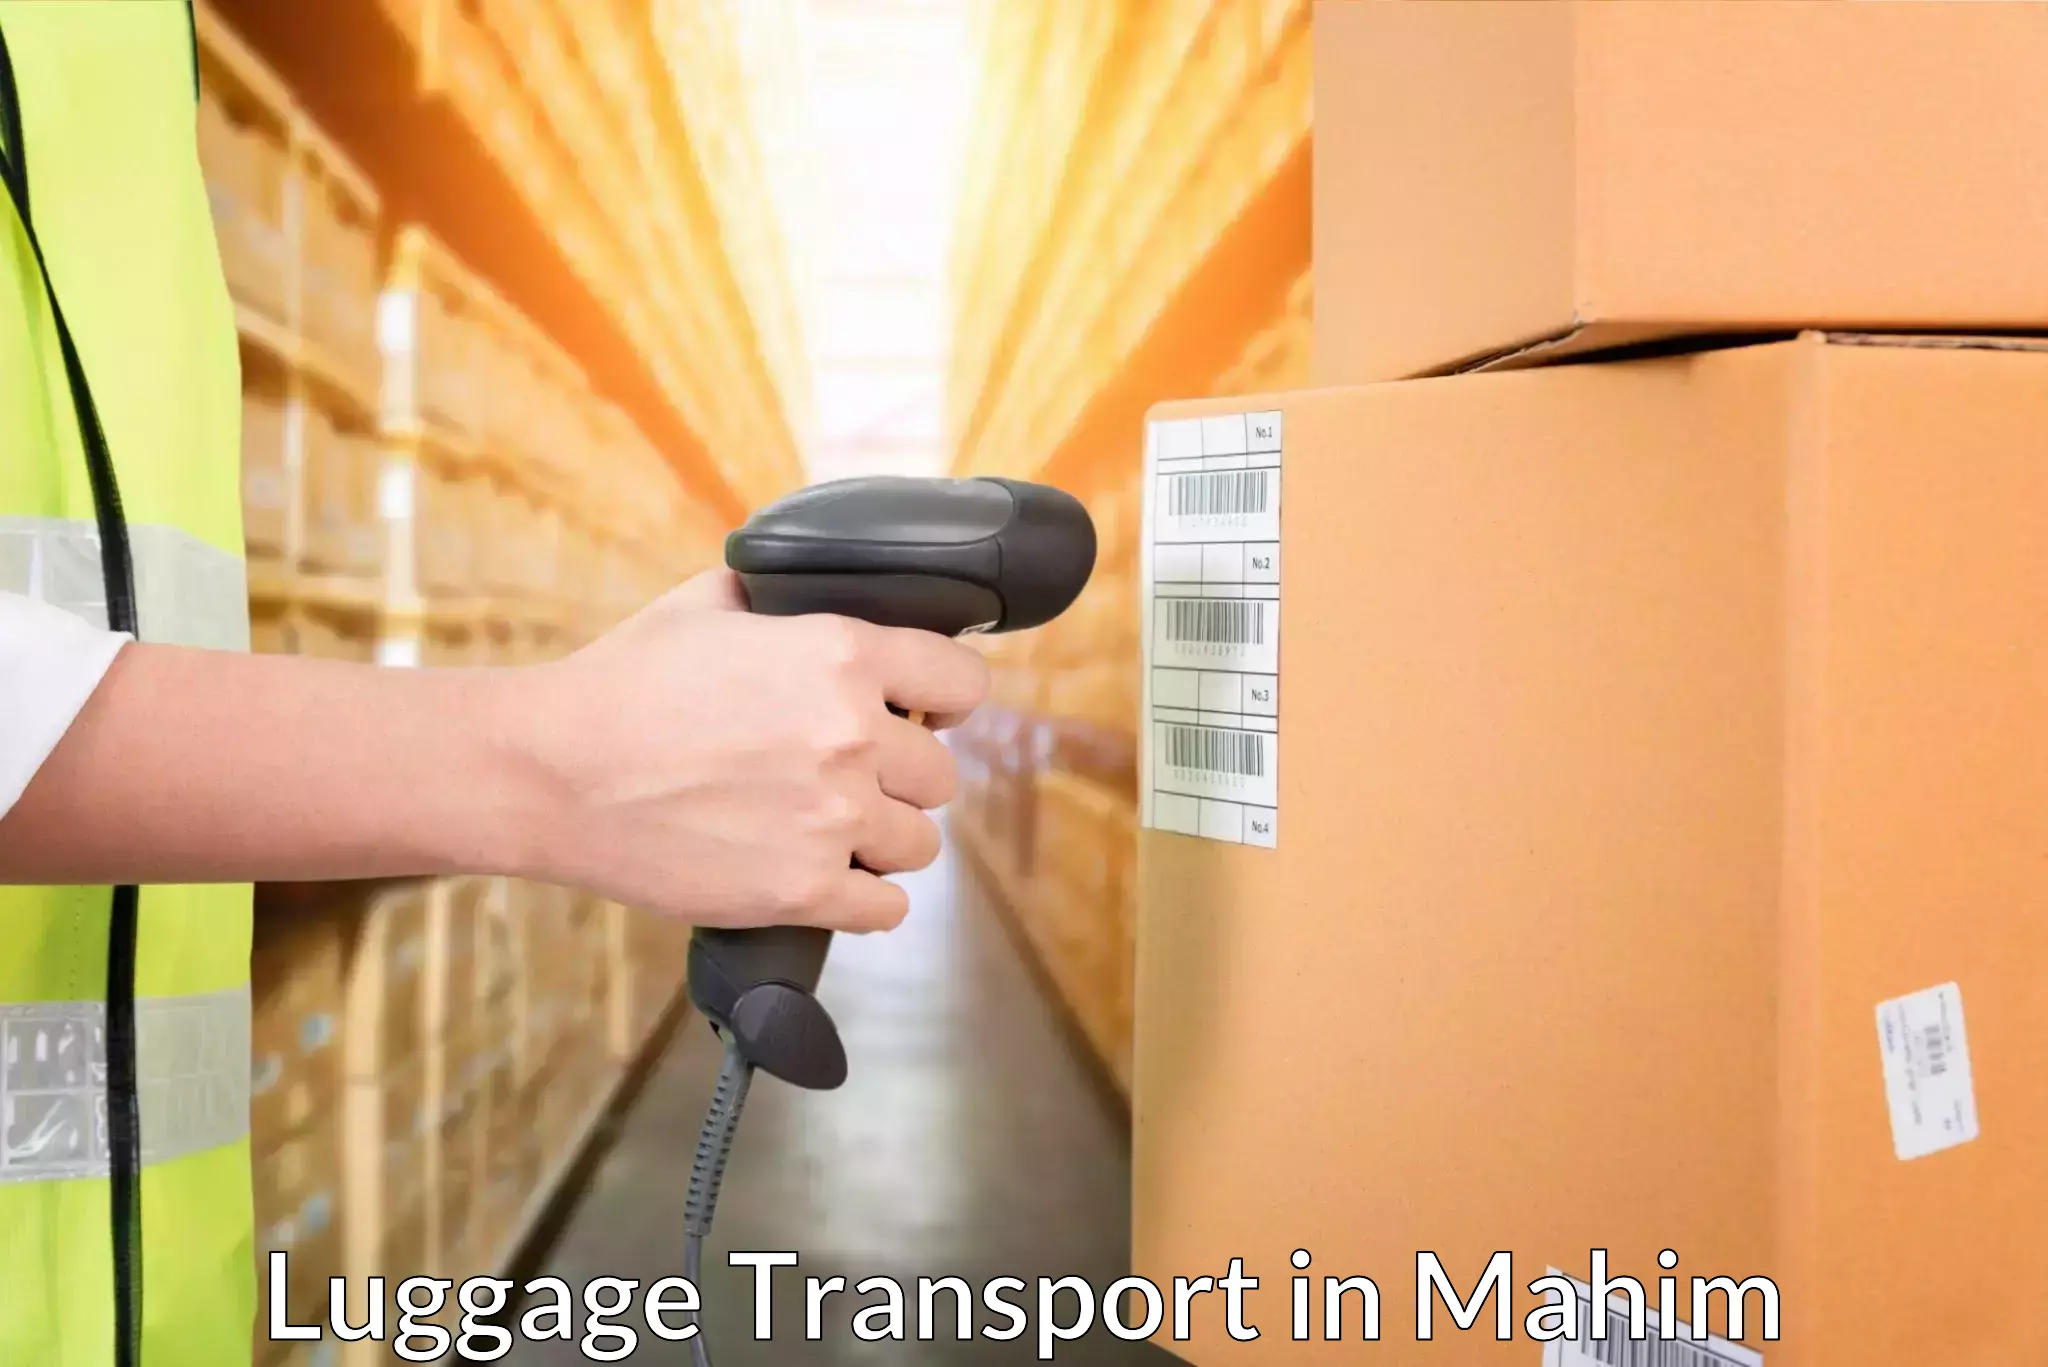 Automated luggage transport in Mahim